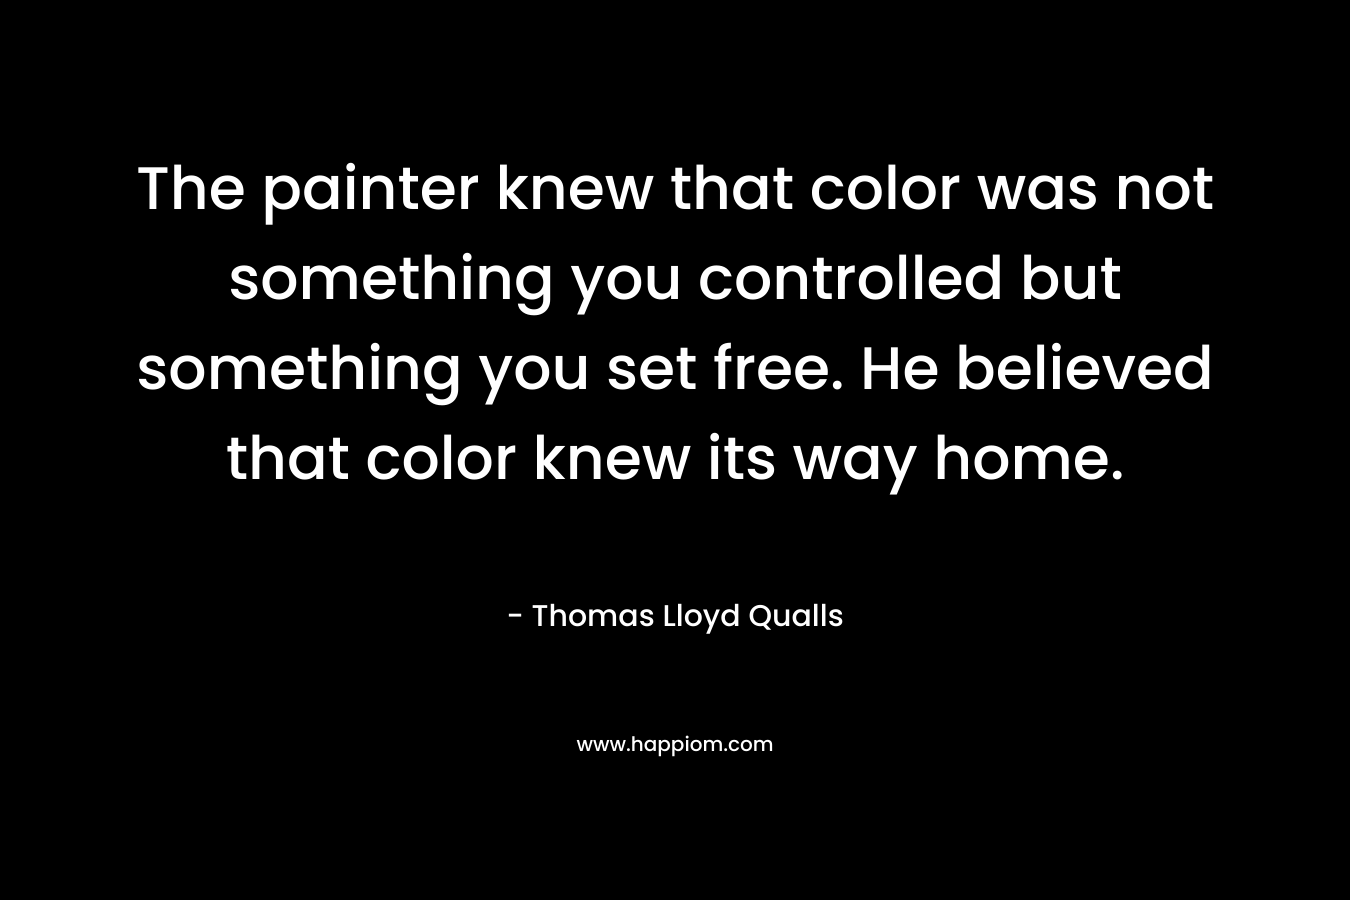 The painter knew that color was not something you controlled but something you set free. He believed that color knew its way home.